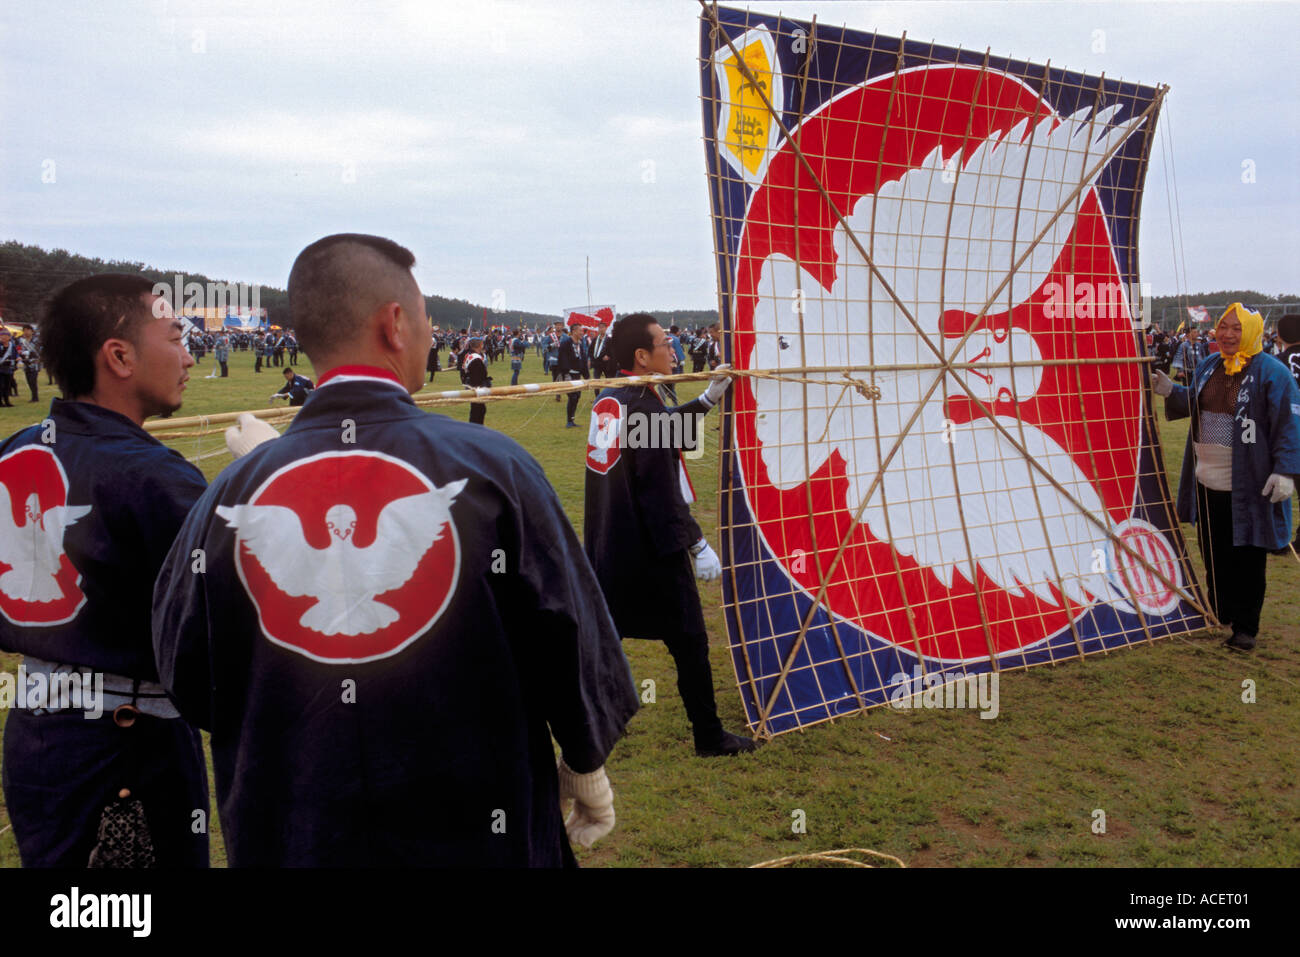 Team wearing costumes prepare their kite for flight and battle at Hamamatsu Giant Kite Festival Stock Photo